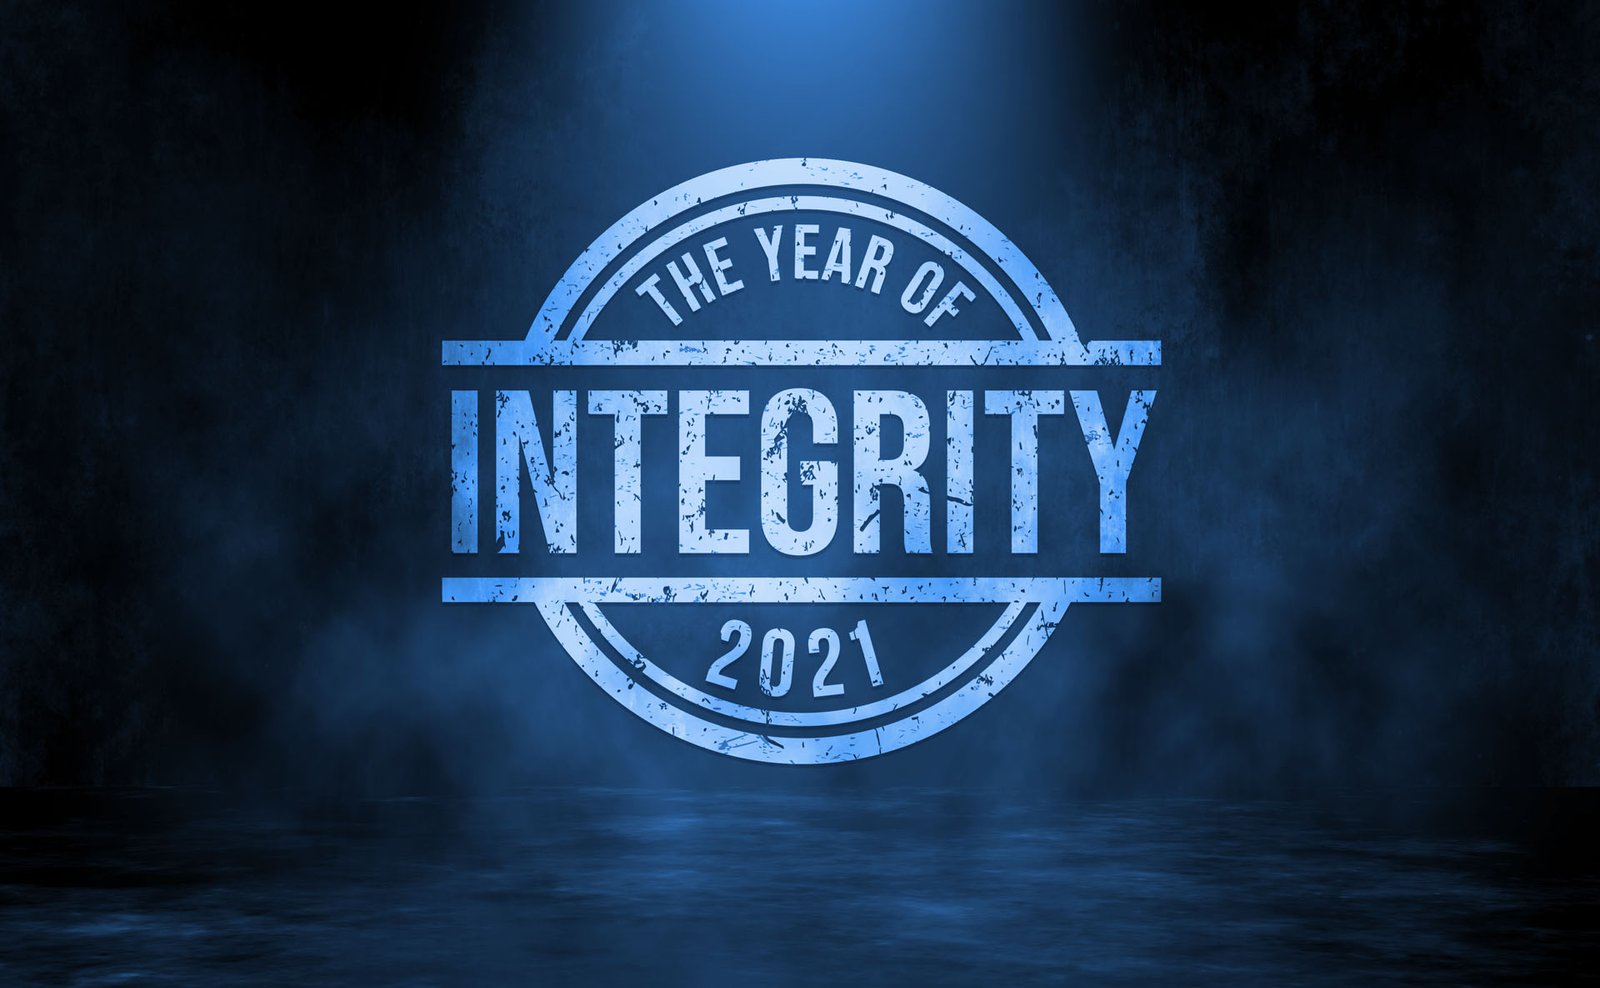 2021 The Year of Integrity